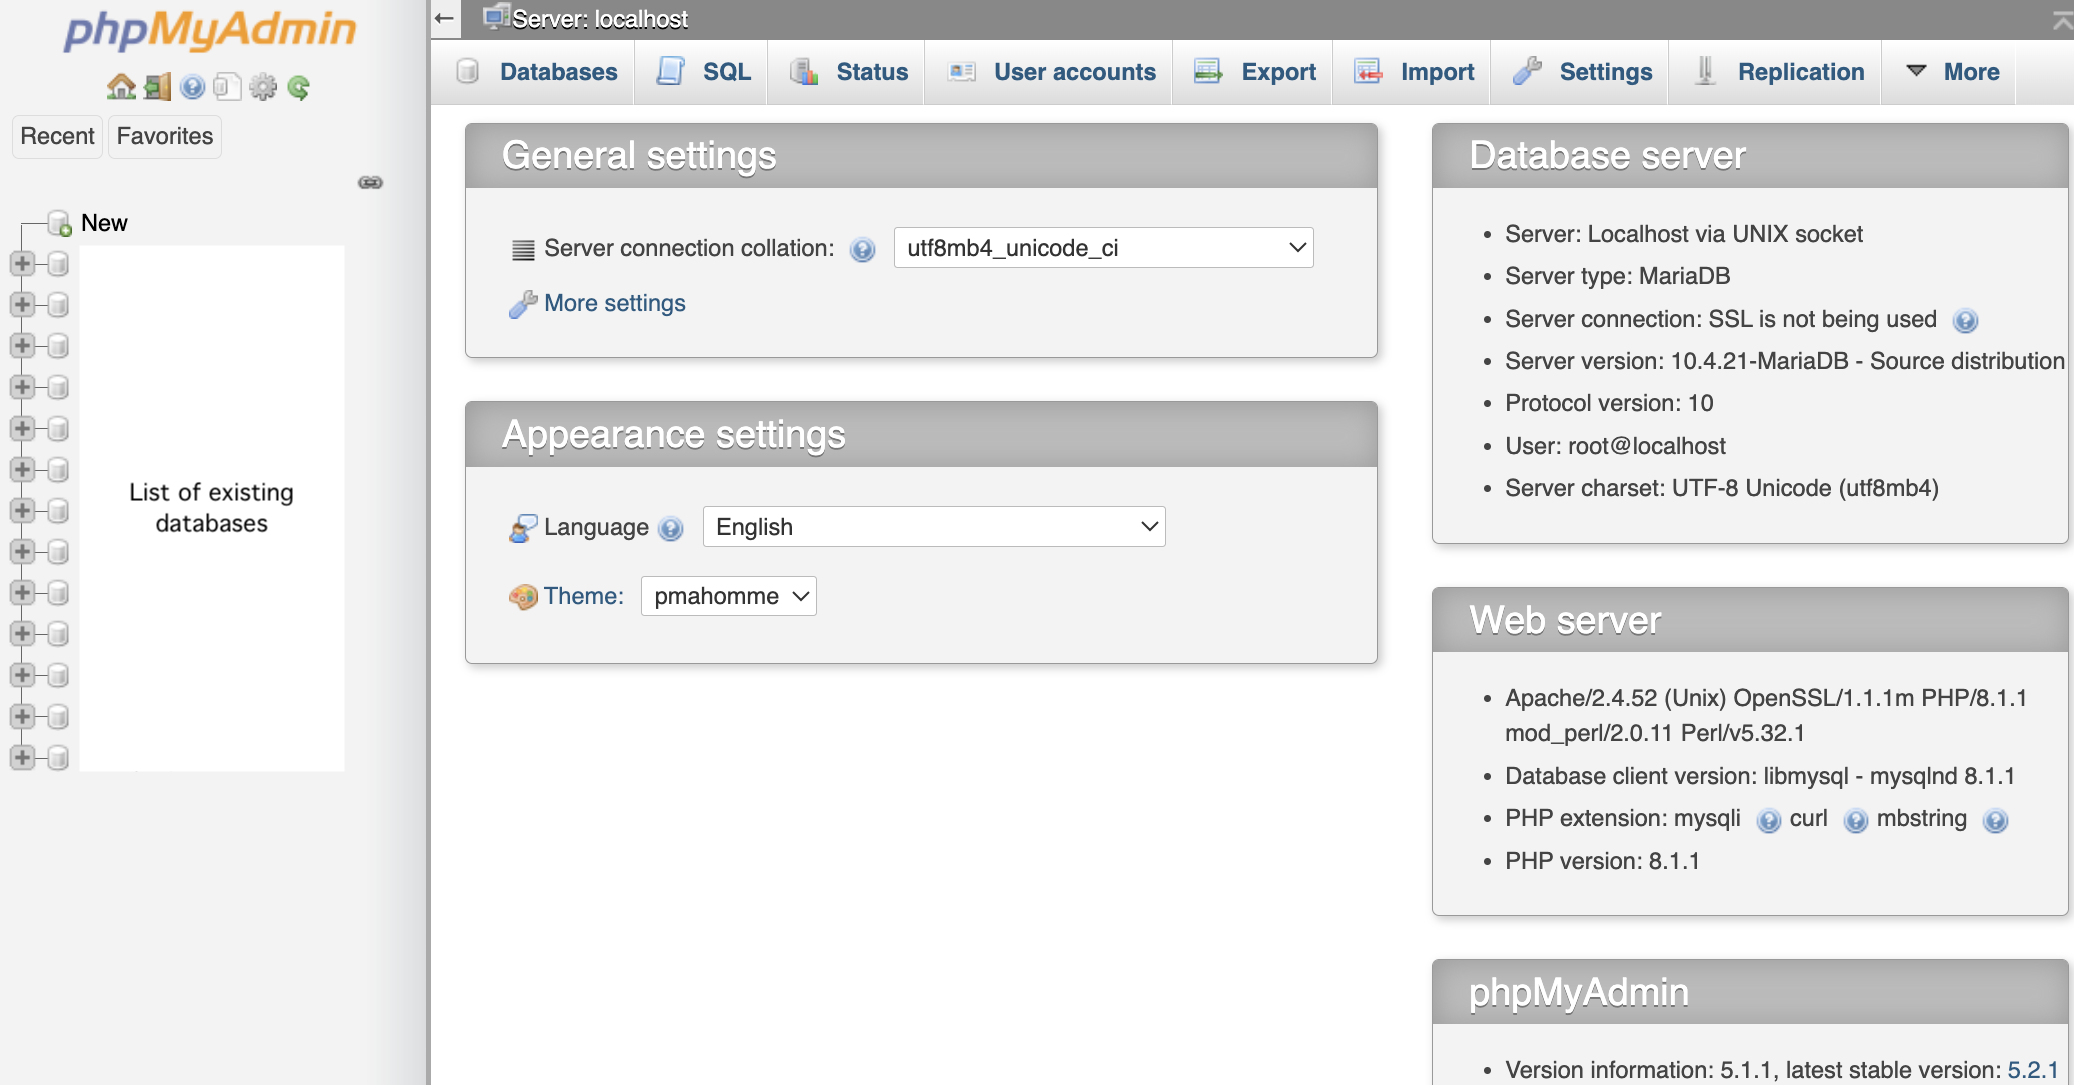 screen showing the main page of phpMyAdmin